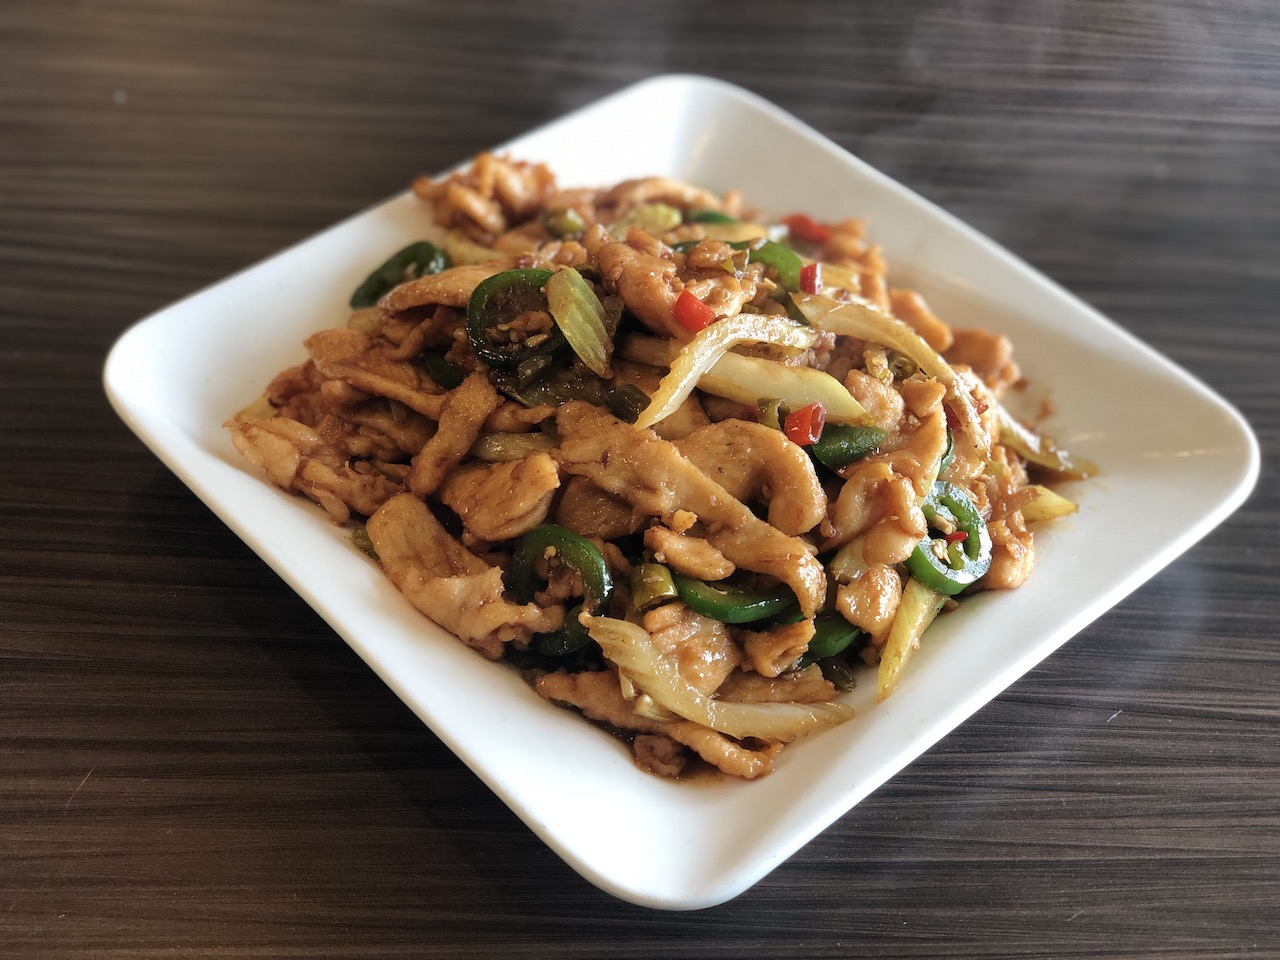 Stir Fried Chicken with Pickled Chili 泡椒鸡